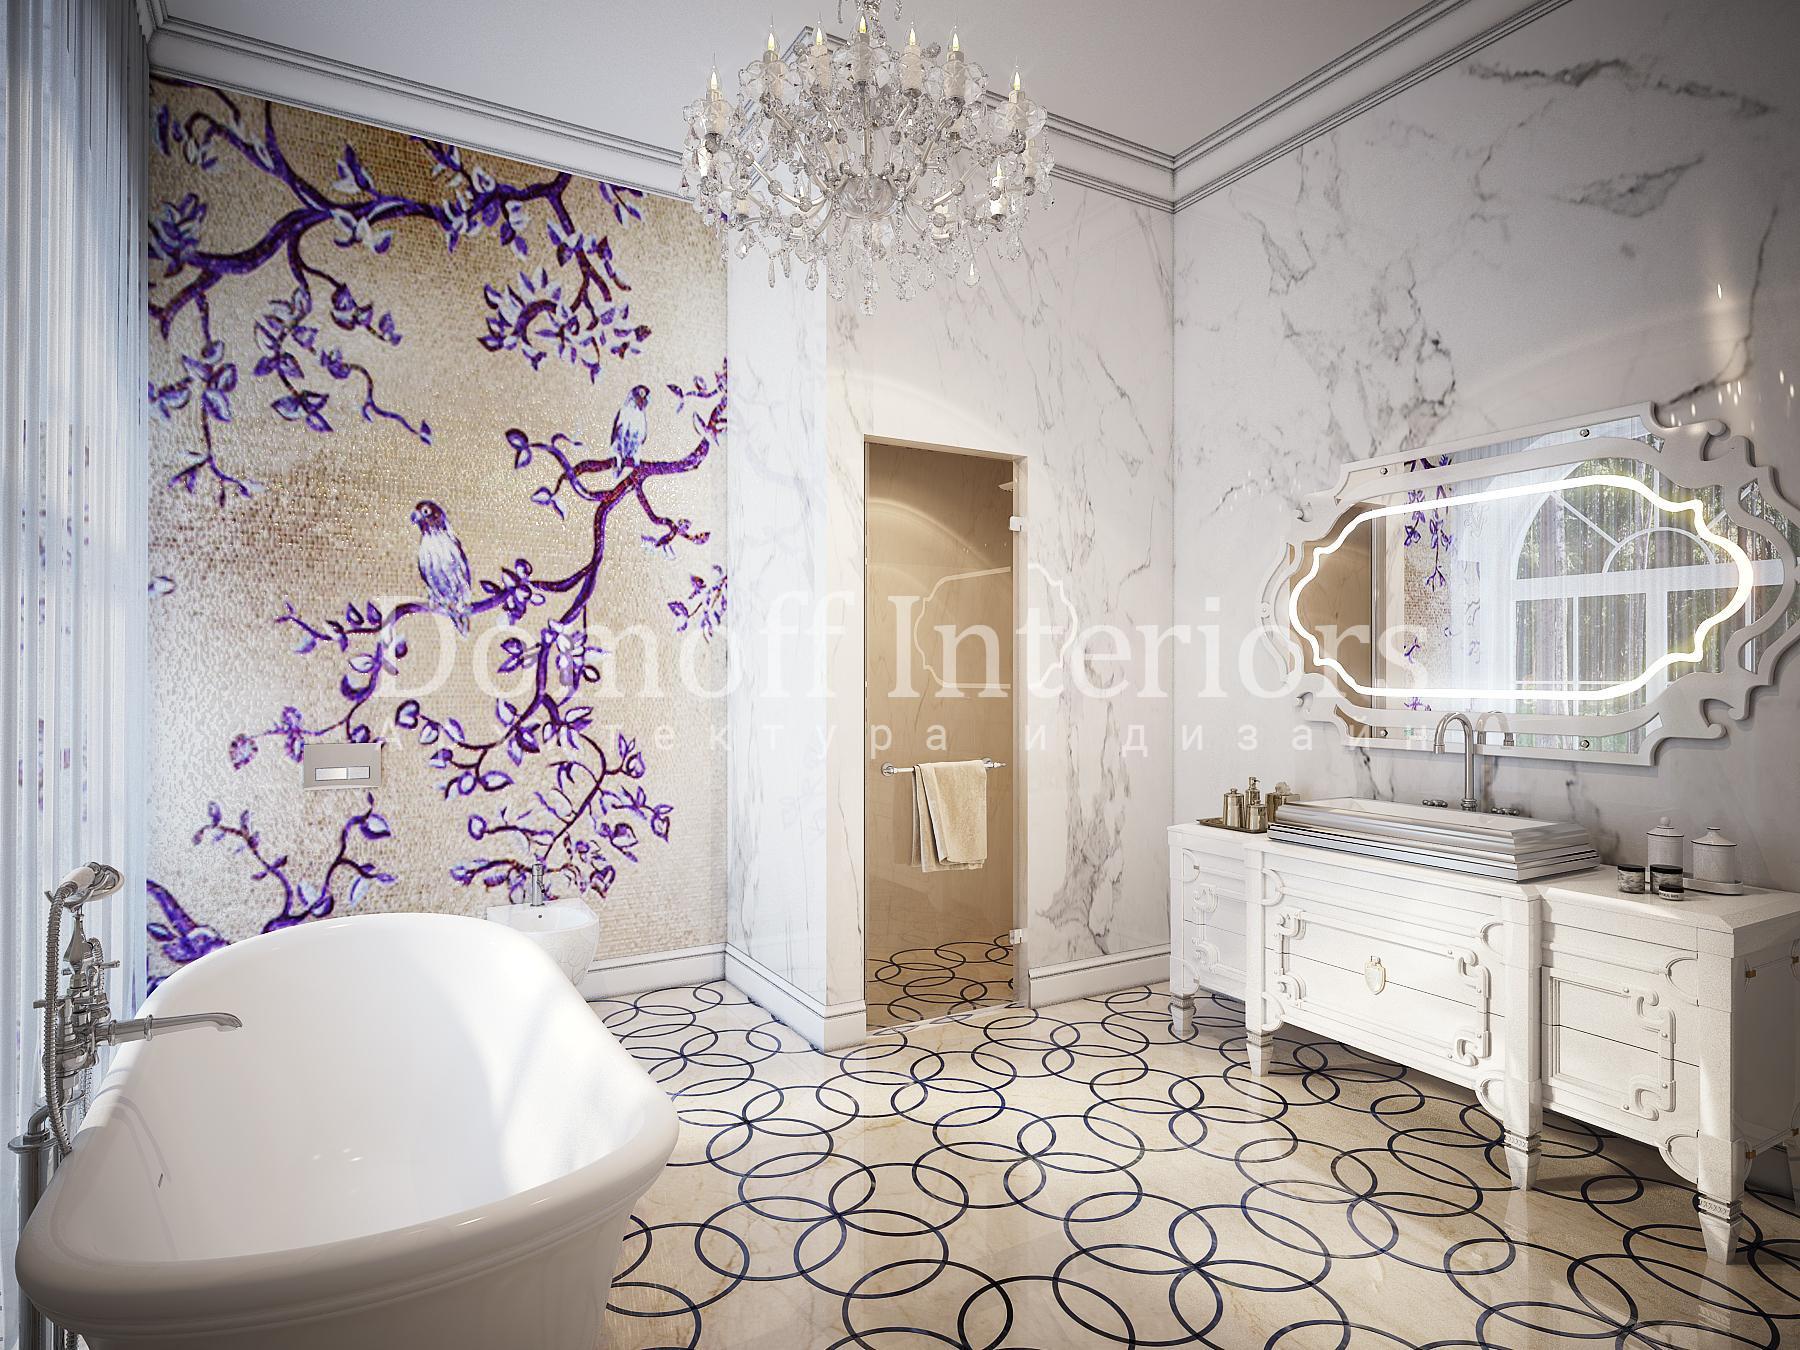 Bathroom of younger daughter's bedroom made in the style of Eclecticism Contemporary classics